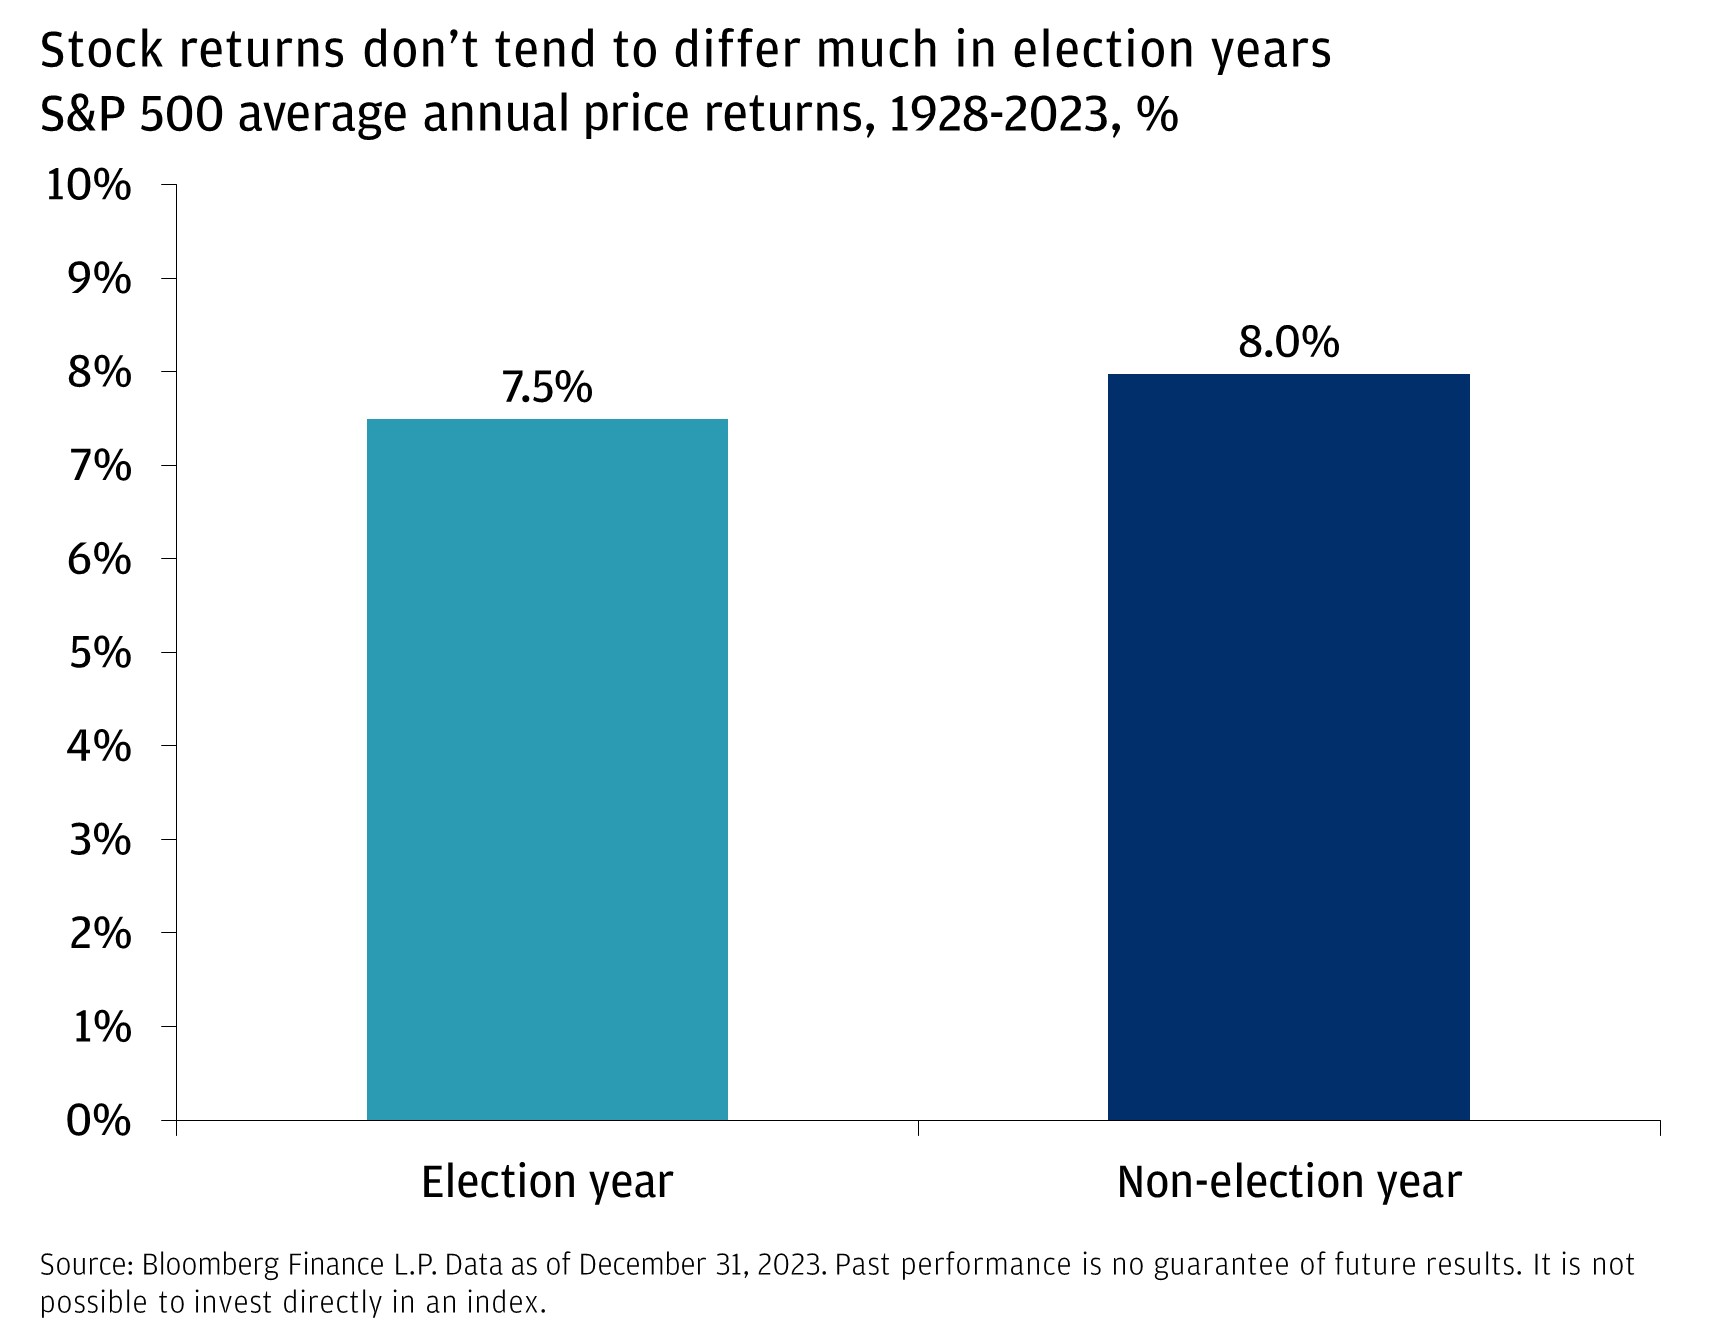 Stock returns don’t tend to differ much in election years